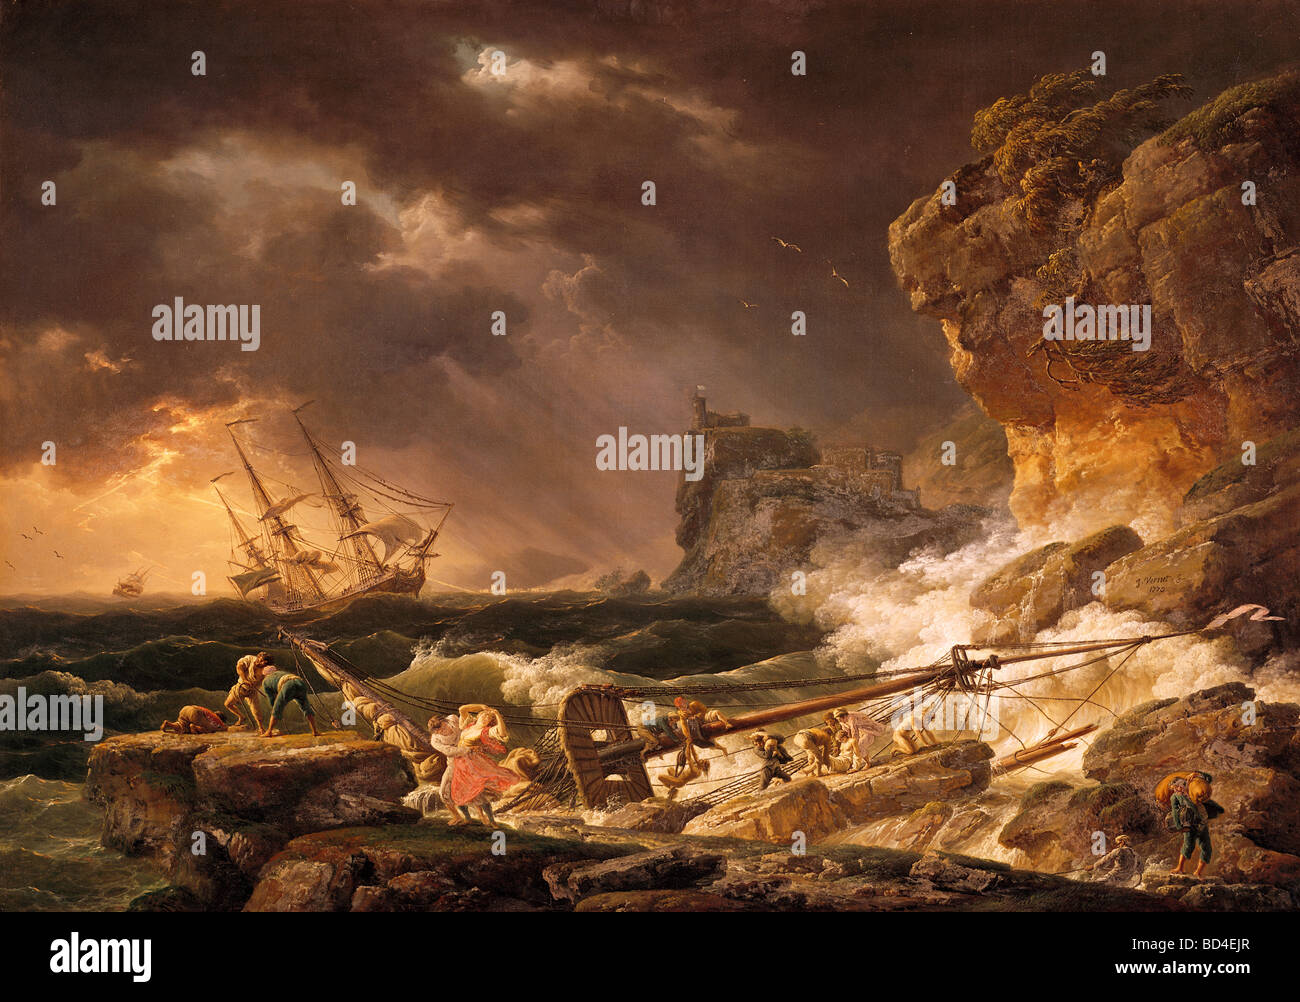 Vernet Claude Joseph (1714 - 1789), painting, 'Sea Storm', 1772, Castle Schleissheim, Germany, Europe, France, French, shipwr Stock Photo